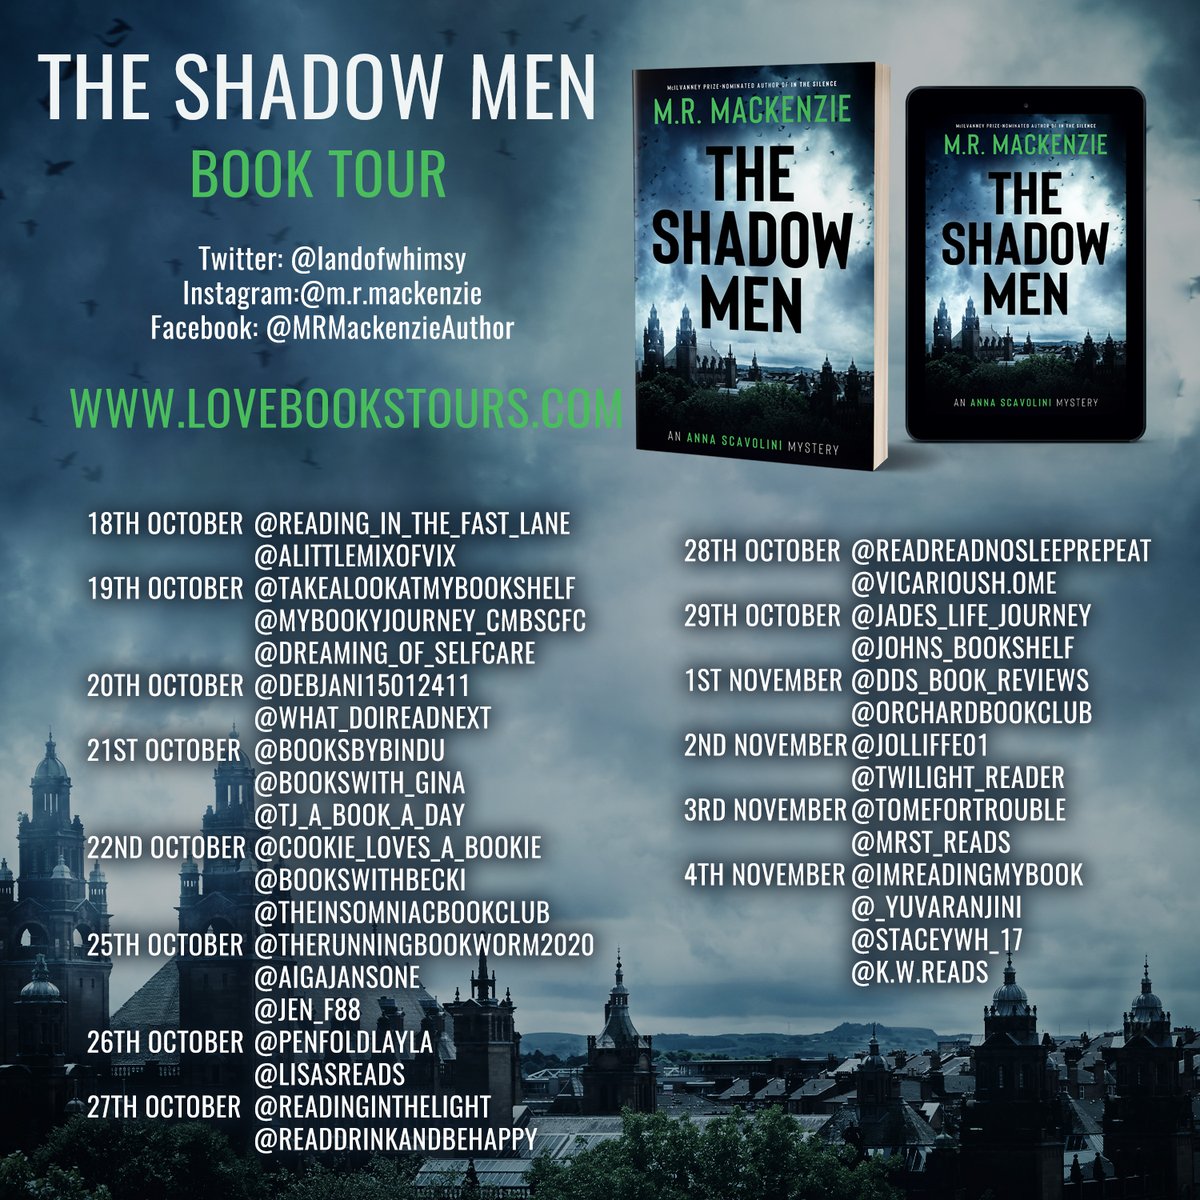 [AD-Book Review]
4*#Review The Shadow Men M.R. Mackenzie  @landofwhimsy wp.me/p3i8vQ-e5P  All the plot elements are drawn together to create an impactful ending. @lovebooksgroup #TheShadowMen #AnnaScavolini #CrimeNoir @lovebookstours #ScottishCrime #CrimeFiction #BookTour